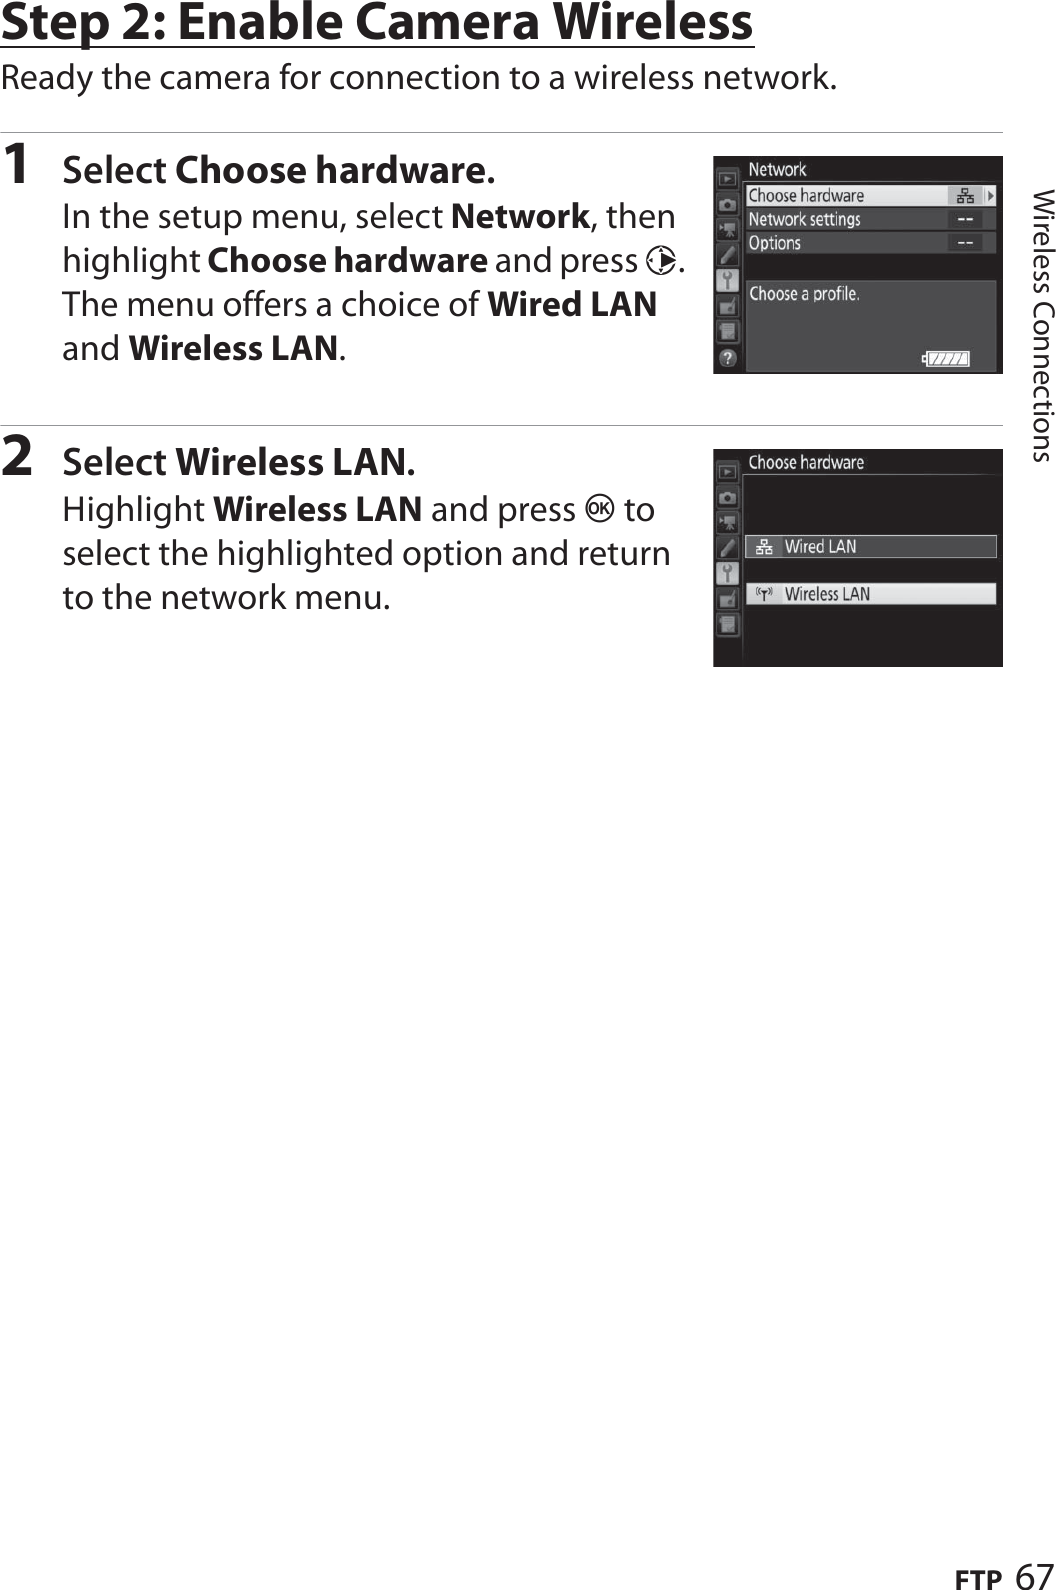 67FTPWireless ConnectionsStep 2: Enable Camera WirelessReady the camera for connection to a wireless network.1Select Choose hardware.In the setup menu, select Network, then highlight Choose hardware and press 2. The menu offers a choice of Wired LAN and Wireless LAN.2Select Wireless LAN.Highlight Wireless LAN and press J to select the highlighted option and return to the network menu.